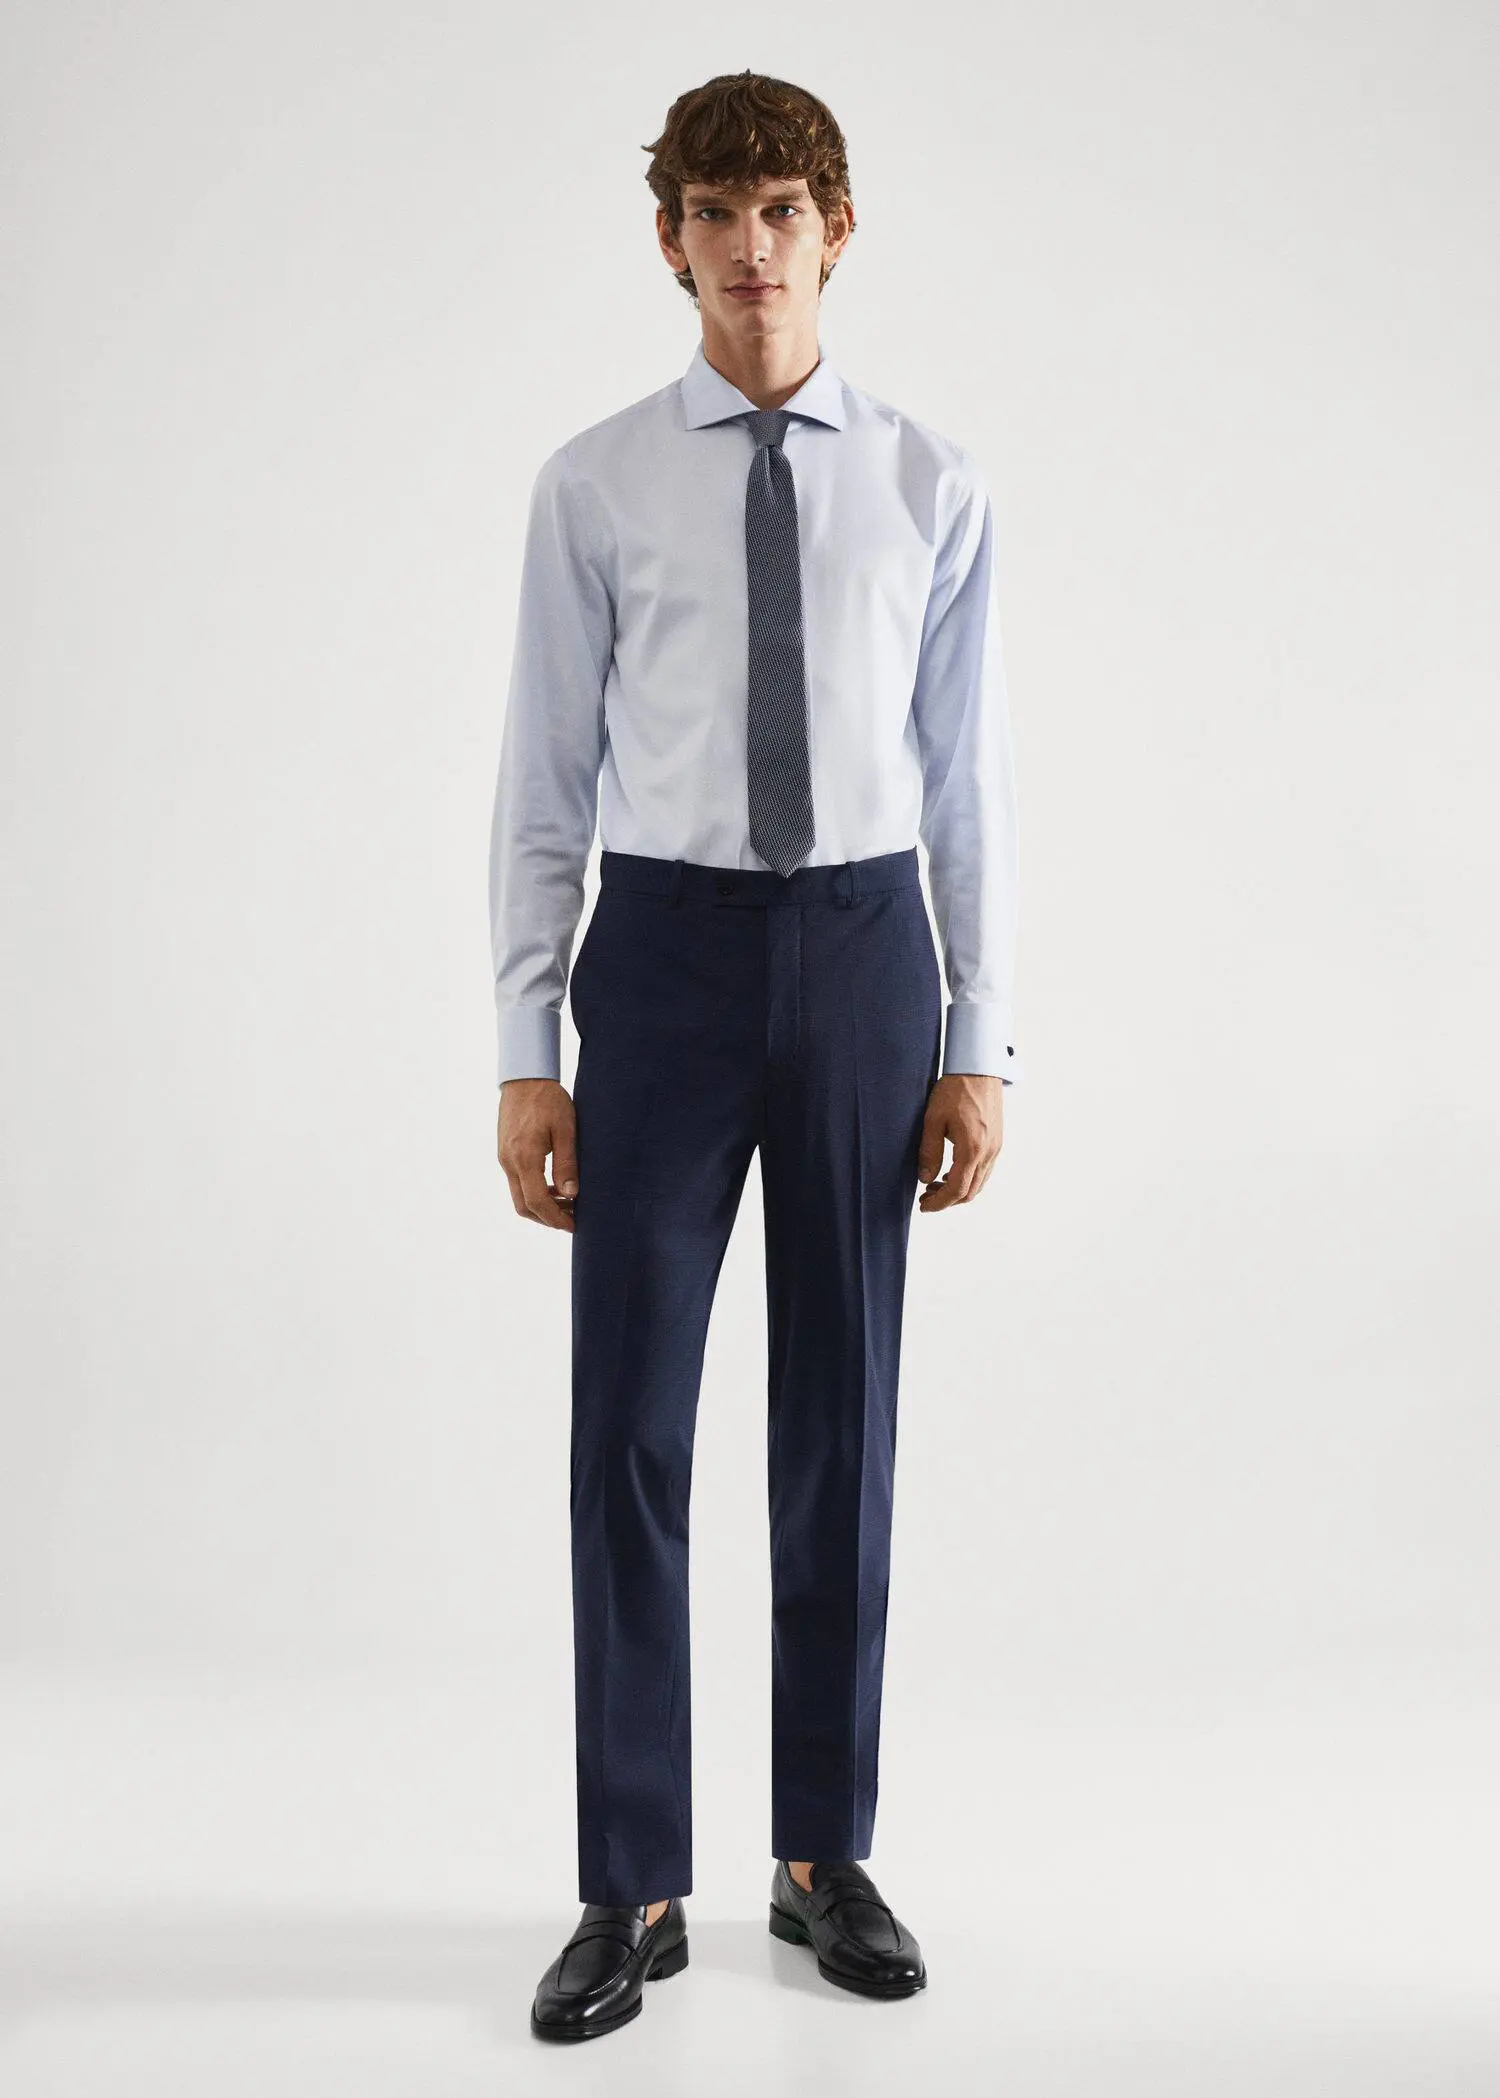 Mango Wool slim-fit check suit pants. a man in a suit and tie standing in front of a white wall. 